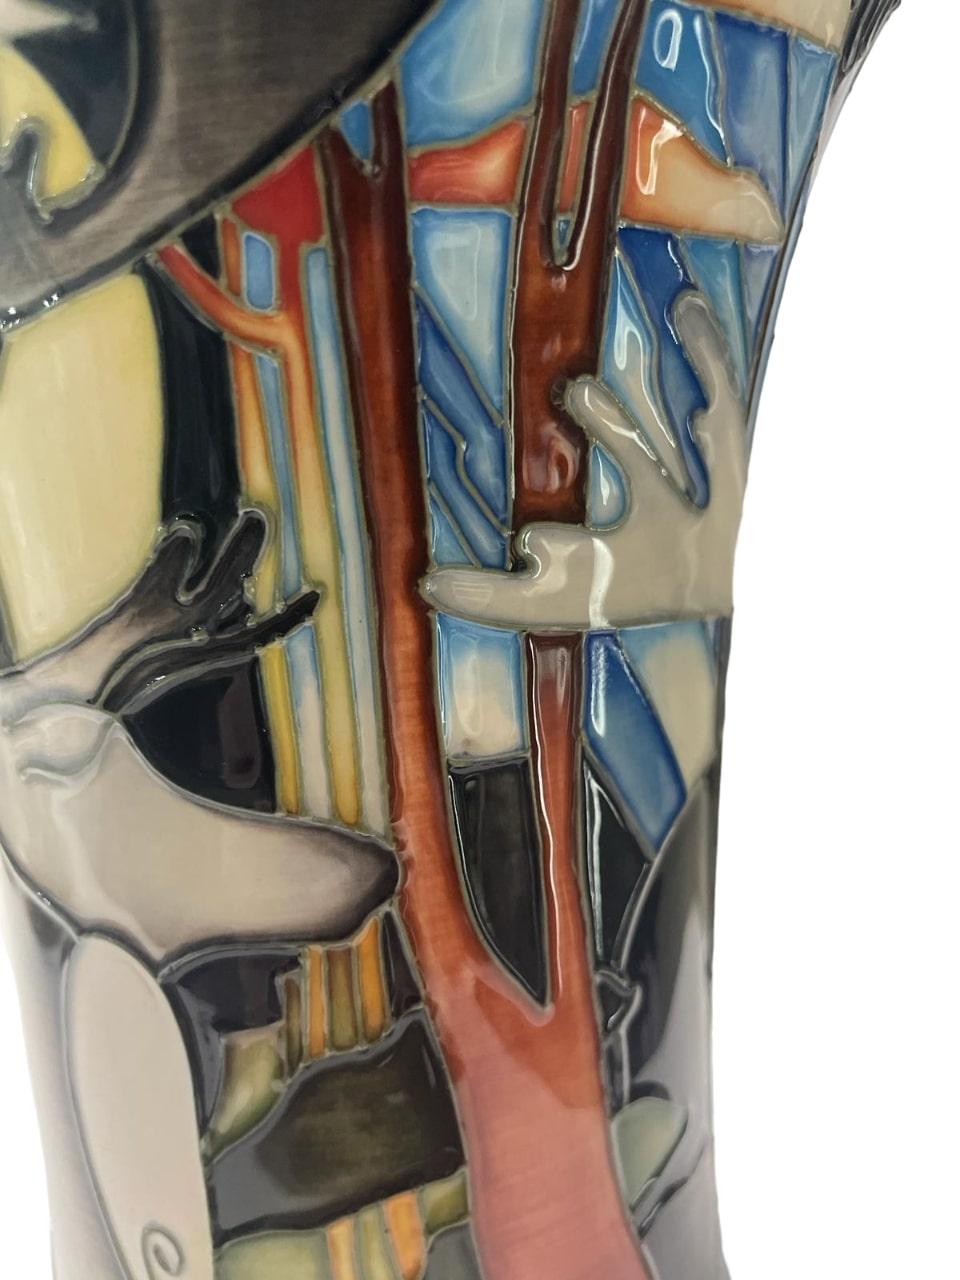 English LIMITED EDITION MOORCROFT Wapiti vase by Emma Bossons dated 2012 31/35 For Sale